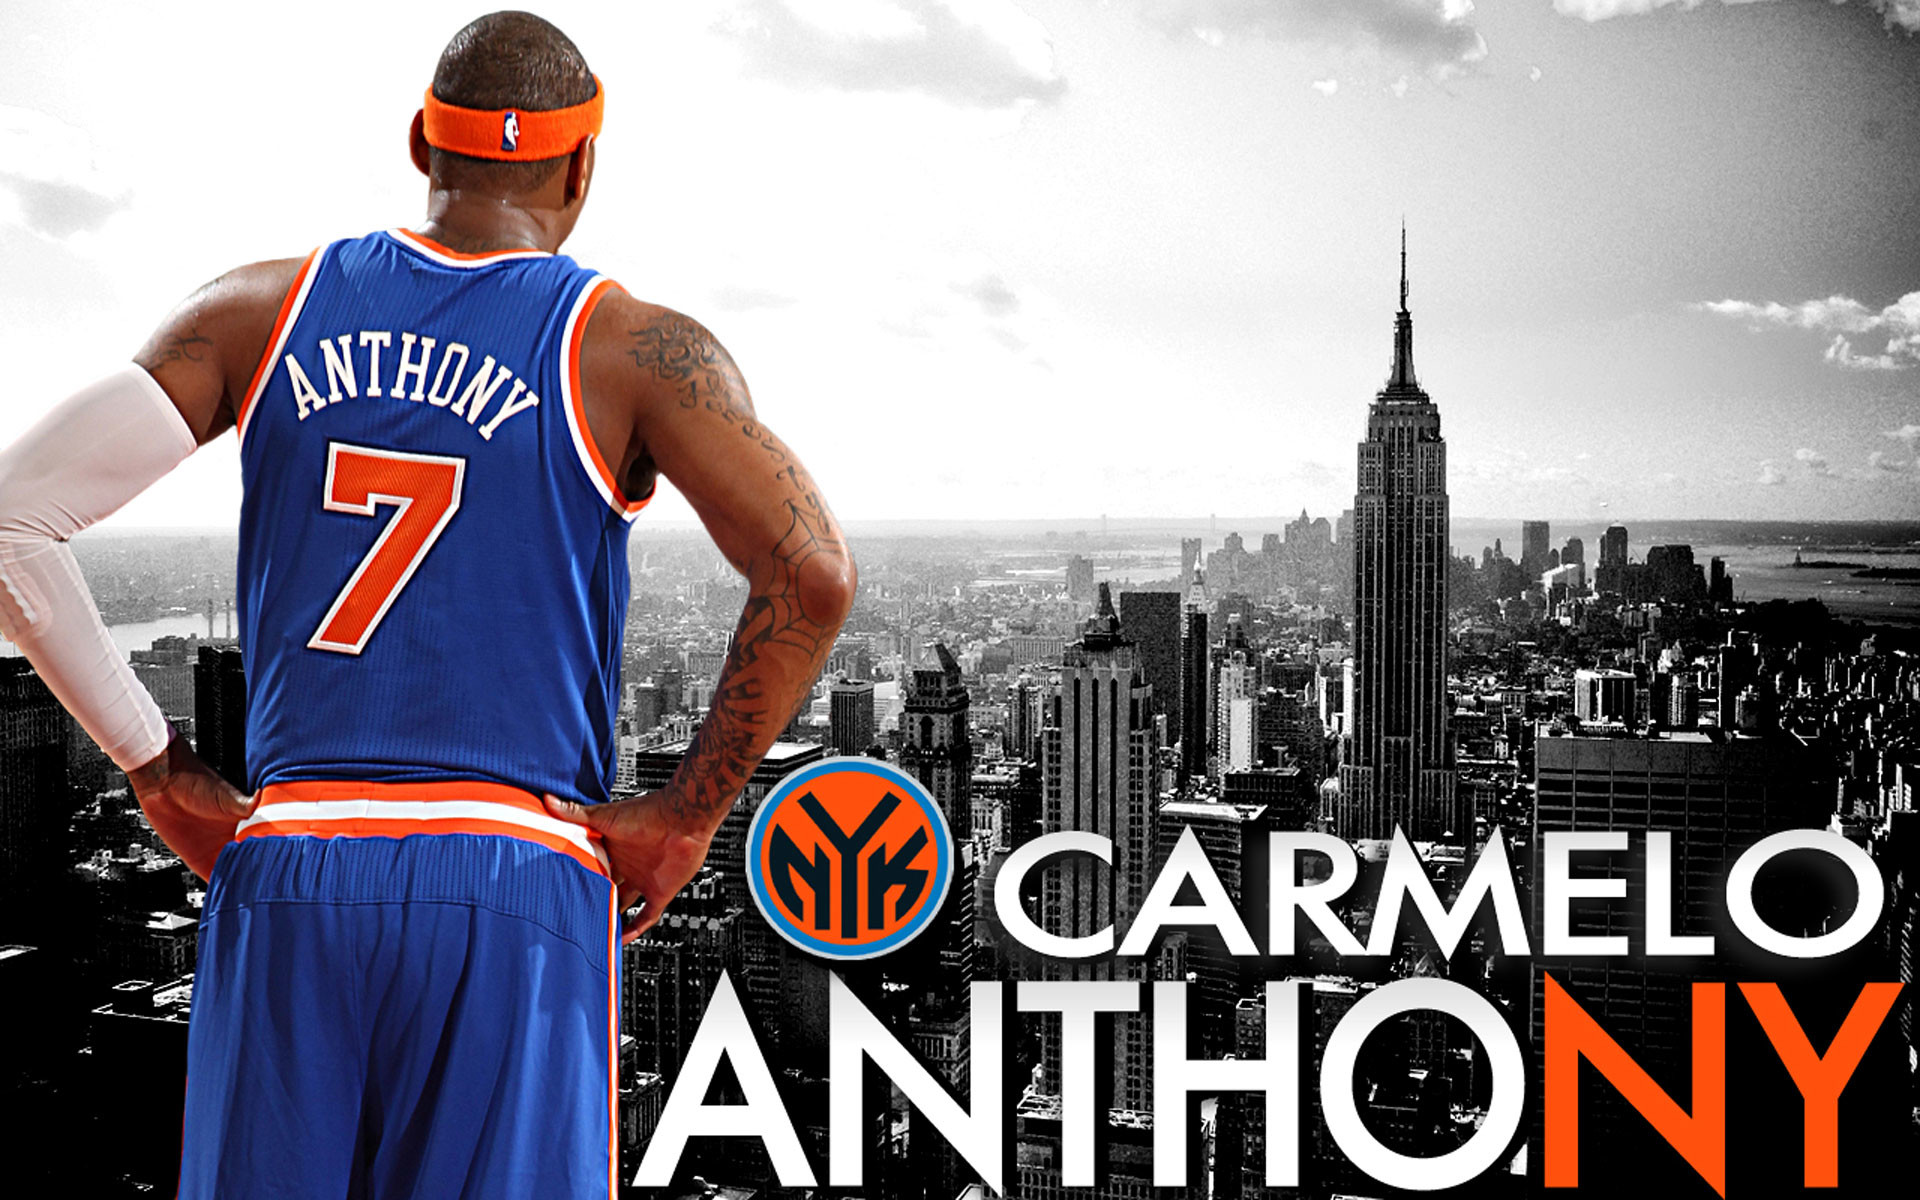 1920x1200 Carmelo Anthony Wallpapers - Wallpaper Cave carmelo anthony | Carmelo  Anthony Wallpapers | Sports | Pinterest .